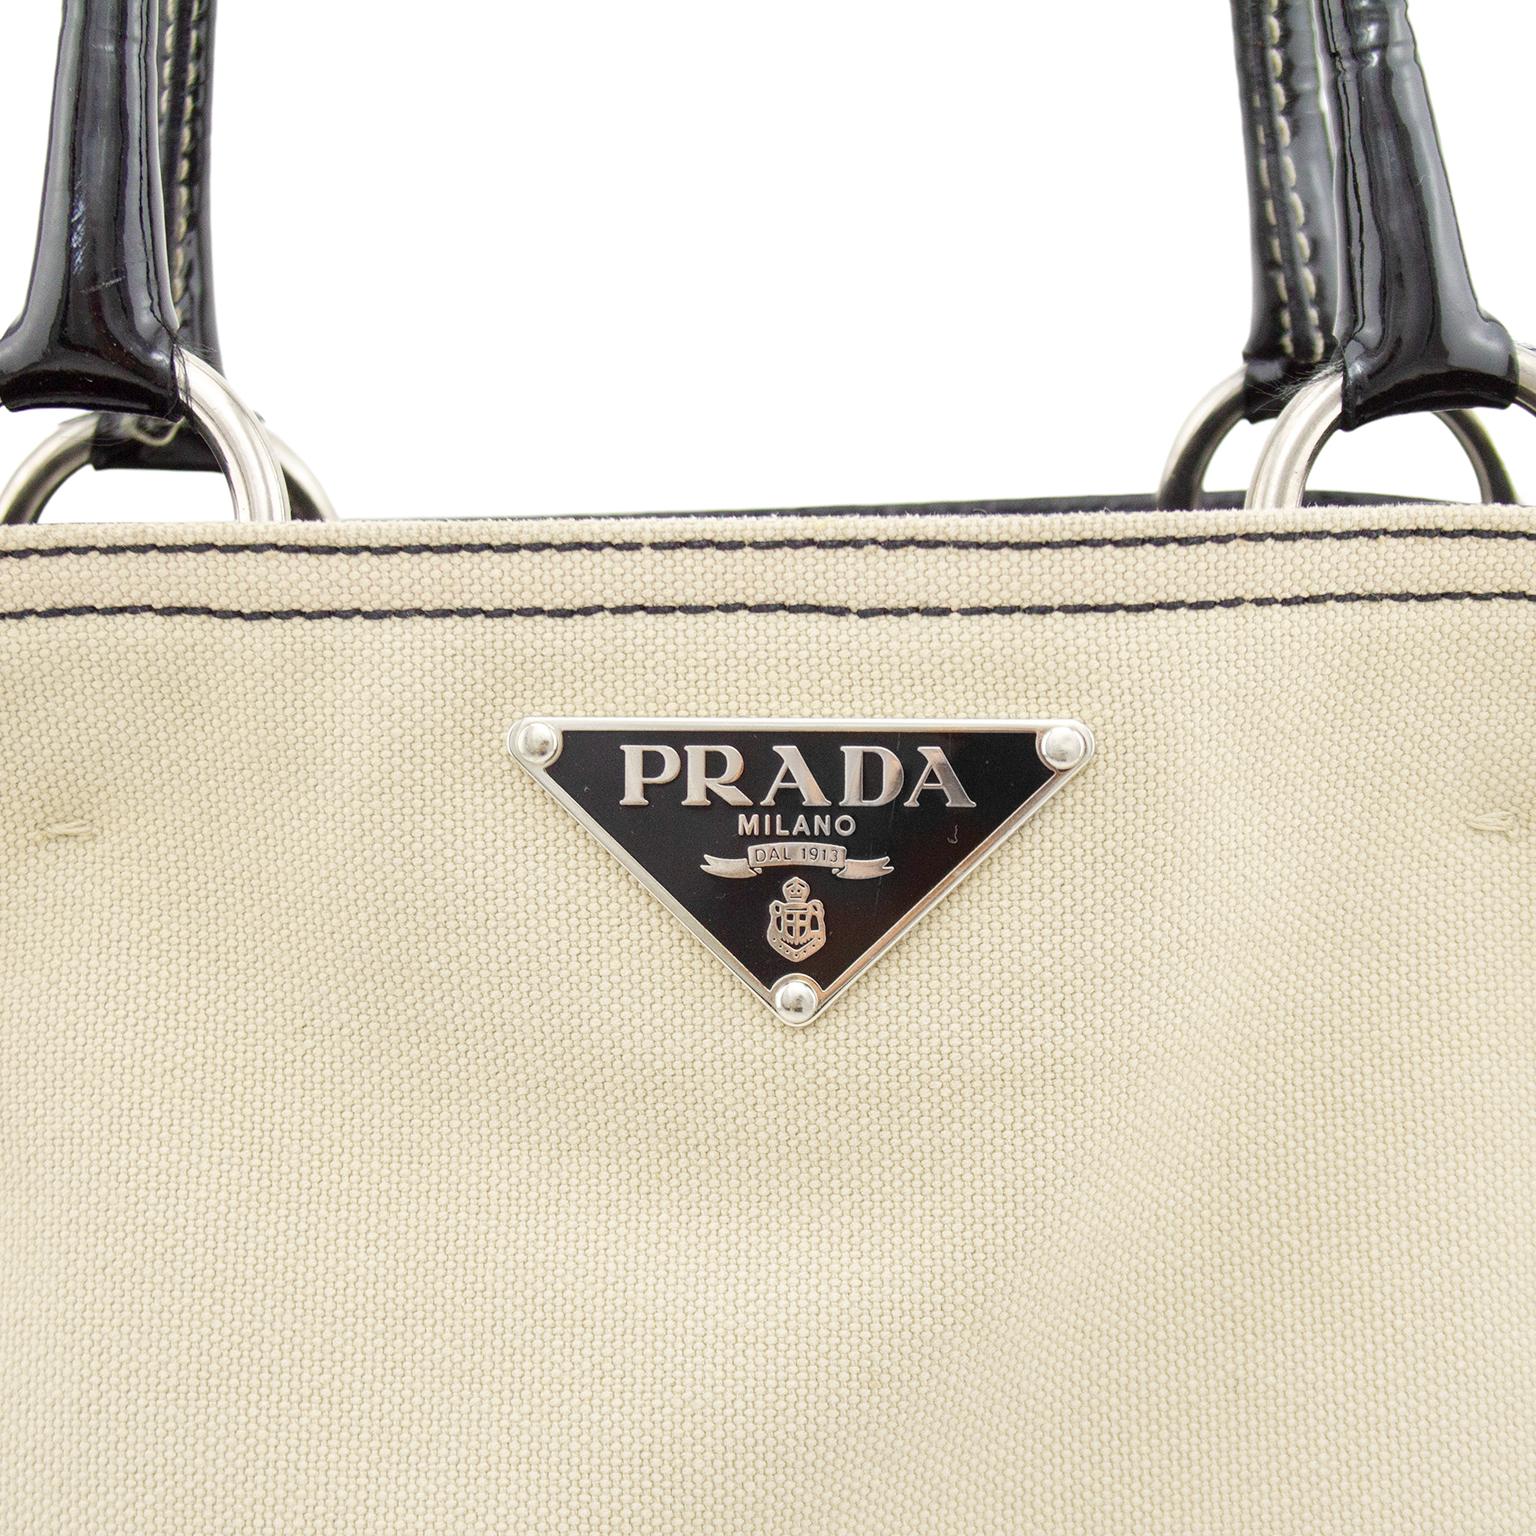 Early 2000s Prada Beige Canvas Tote with Black Patent Leather  For Sale 1